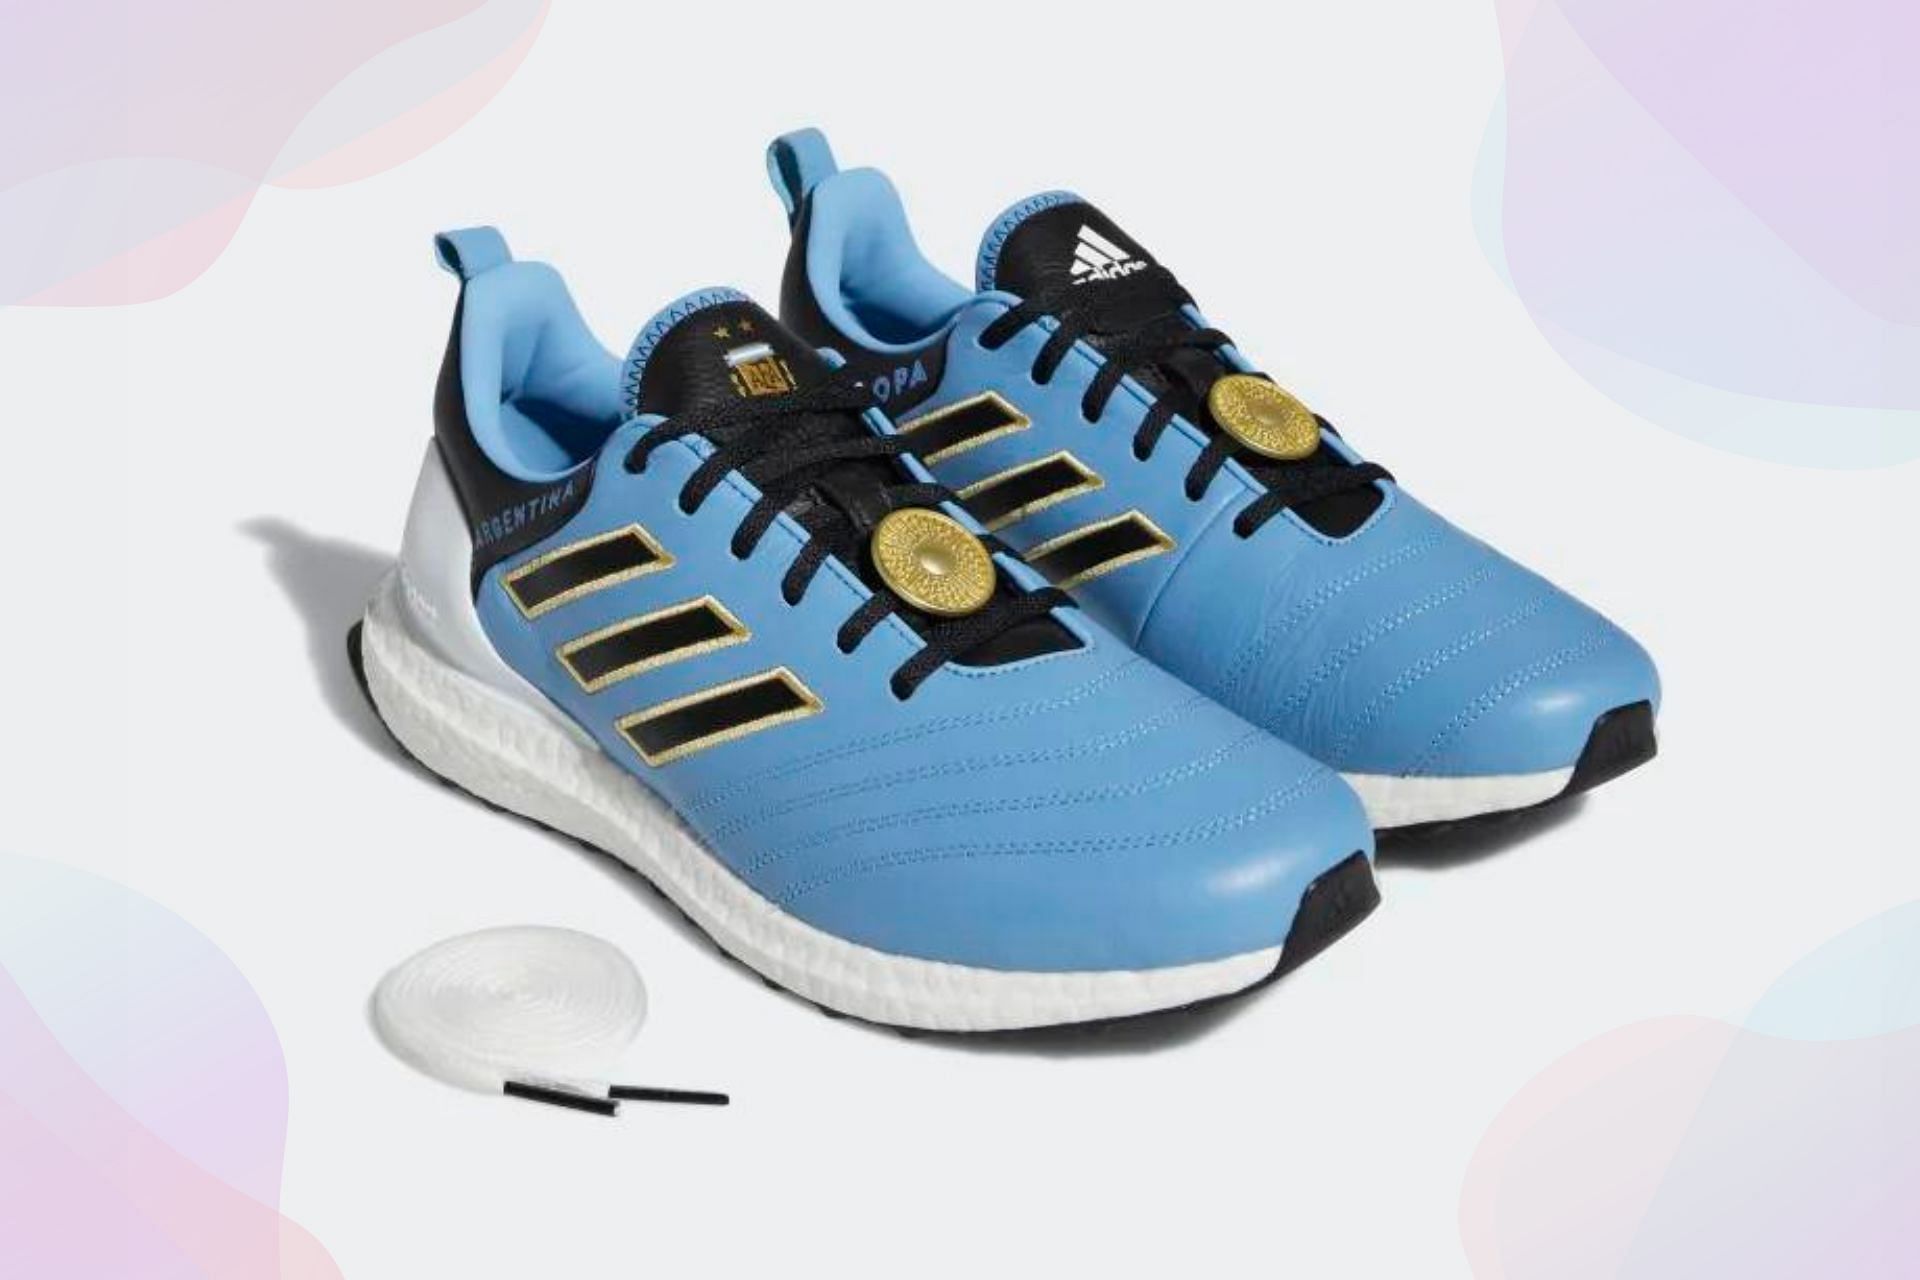 Adidas Ultraboost DNA x Copa Argentina World Cup shoes (Image via Adidas)